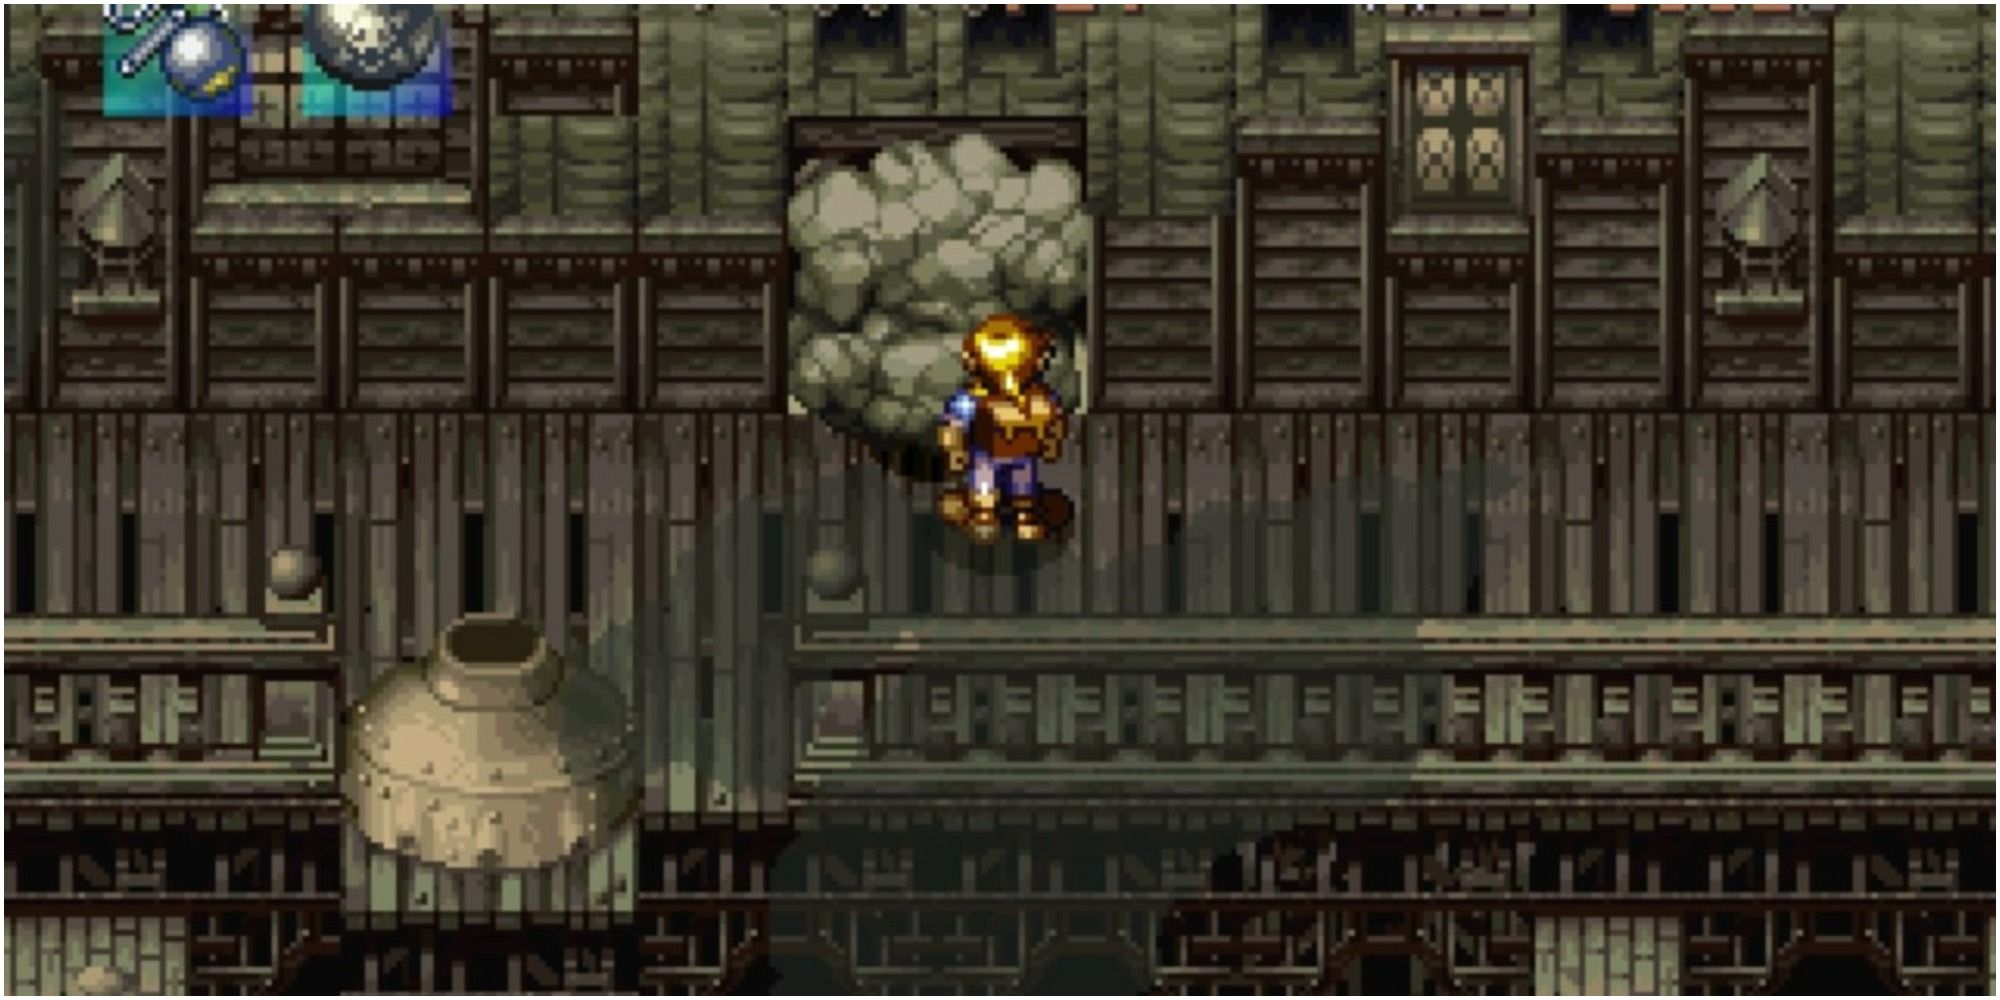 Alundra investigating a pile of rocks blocking an entrance